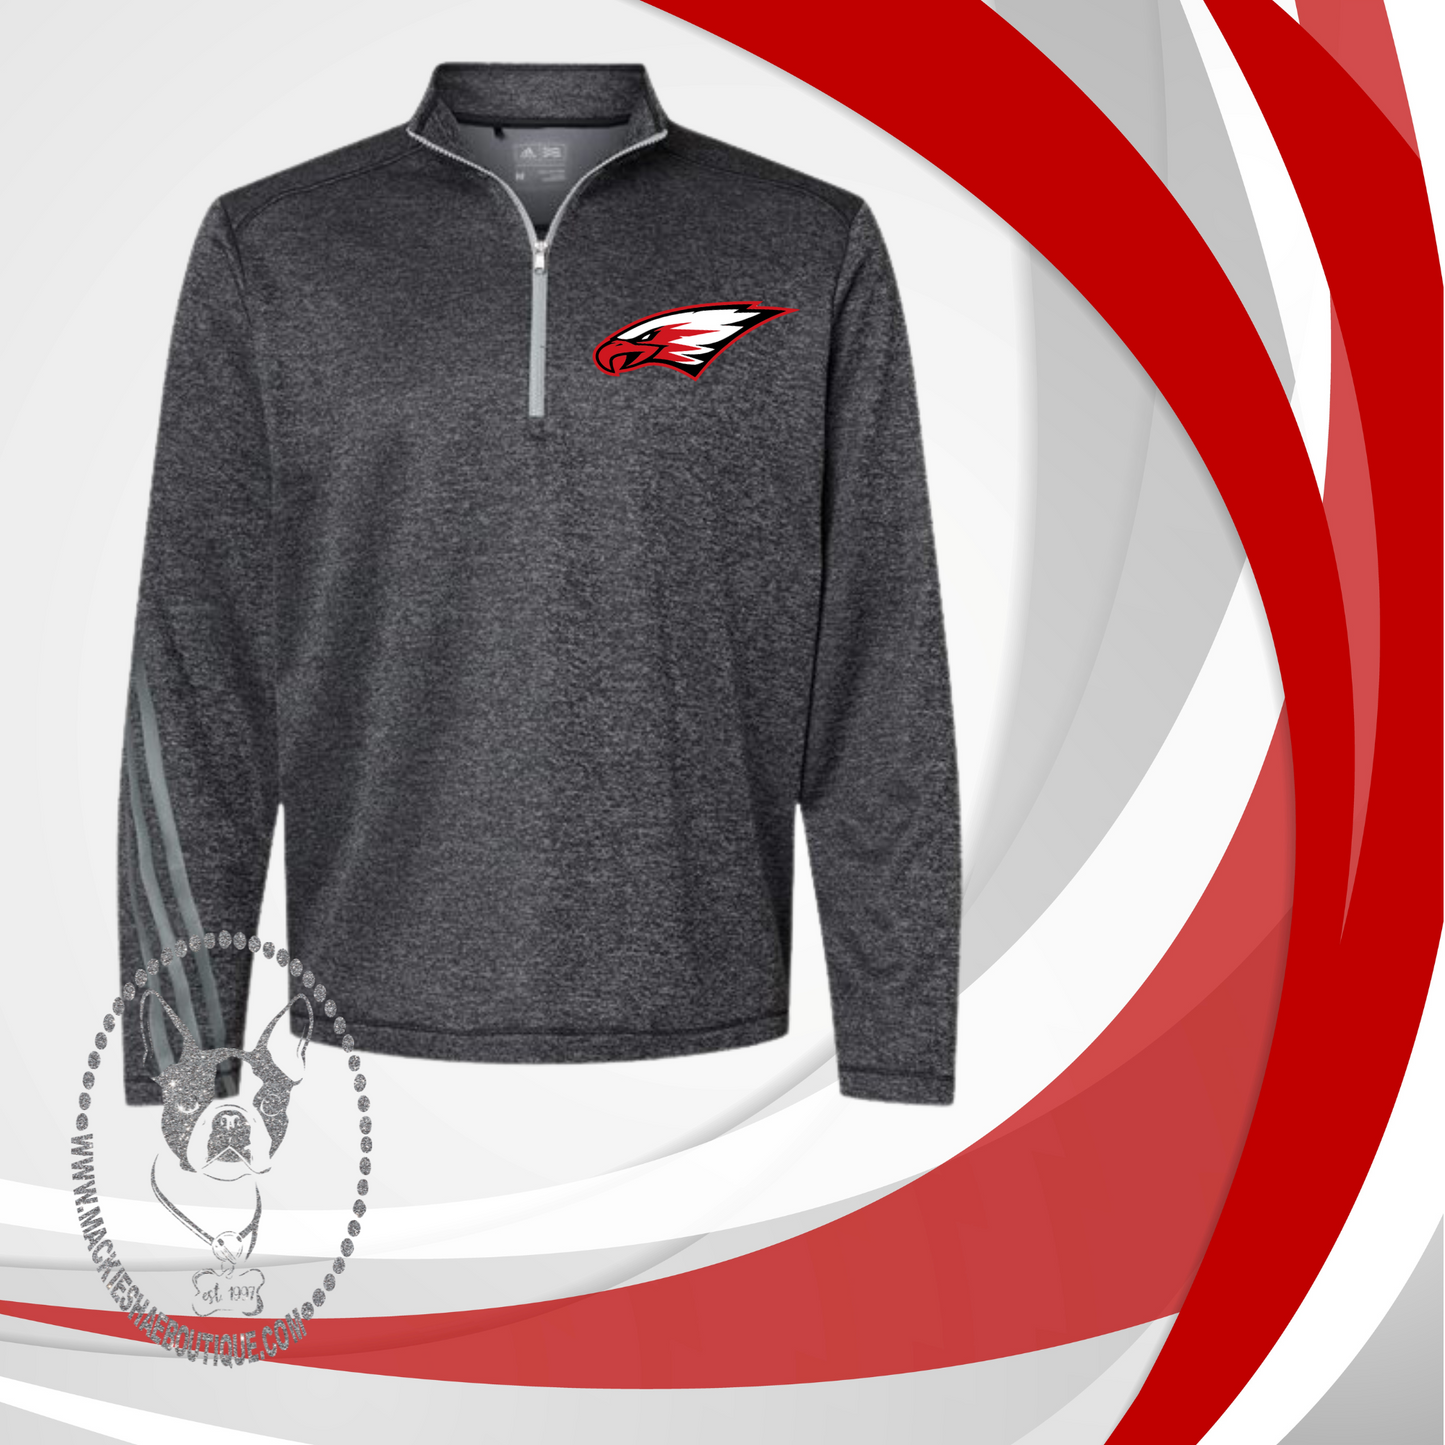 MMS PTO-Maize Eagles Adidas Men's Brushed Black Heathered Terry Heathered Quarter-Zip Pullover